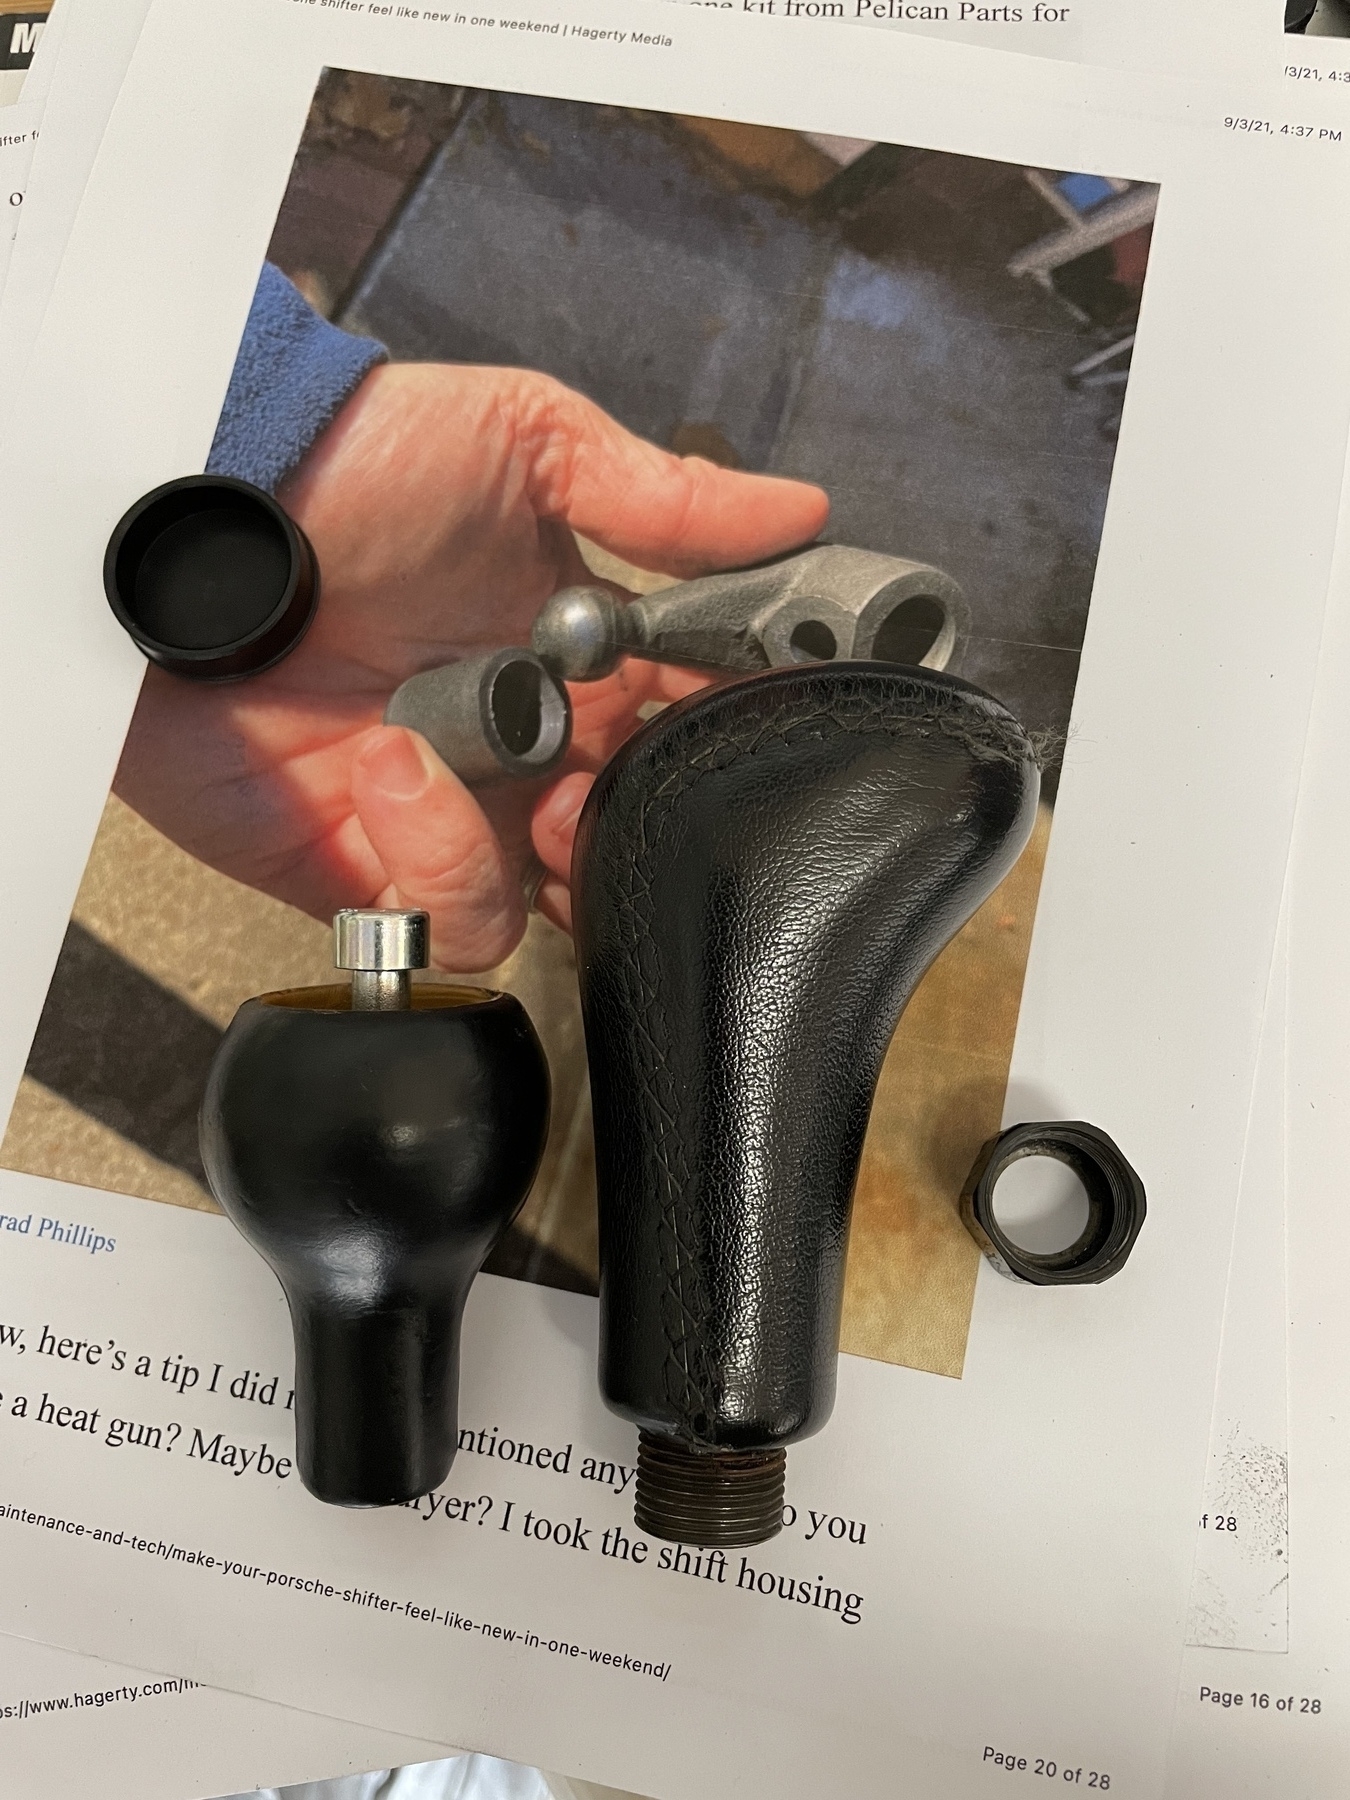 Comparison of the aftermarket knob (right) and the stock knob (left)